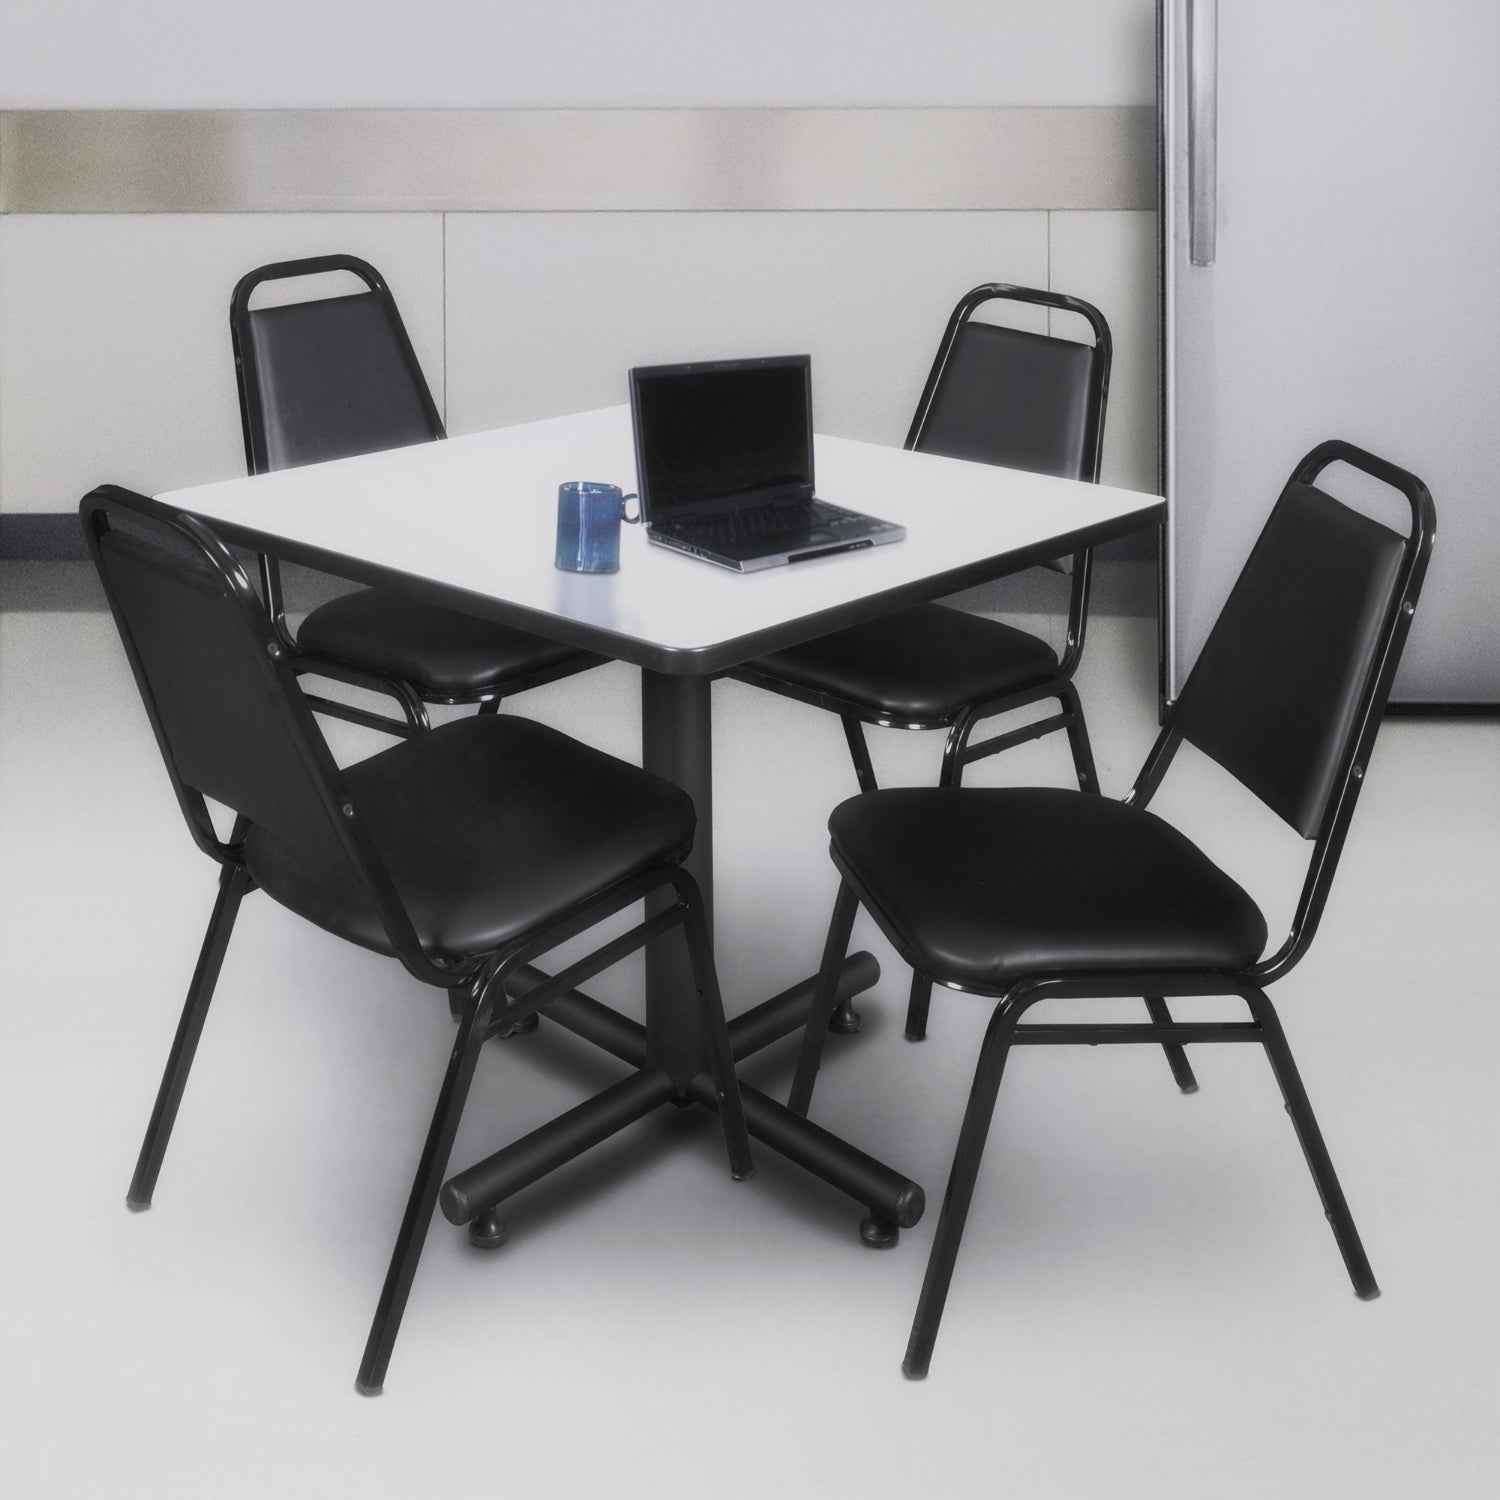 Kobe Square Breakroom Table and Chair Package, Kobe 42" Square X-Base Breakroom Table with 4 Restaurant Stack Chairs